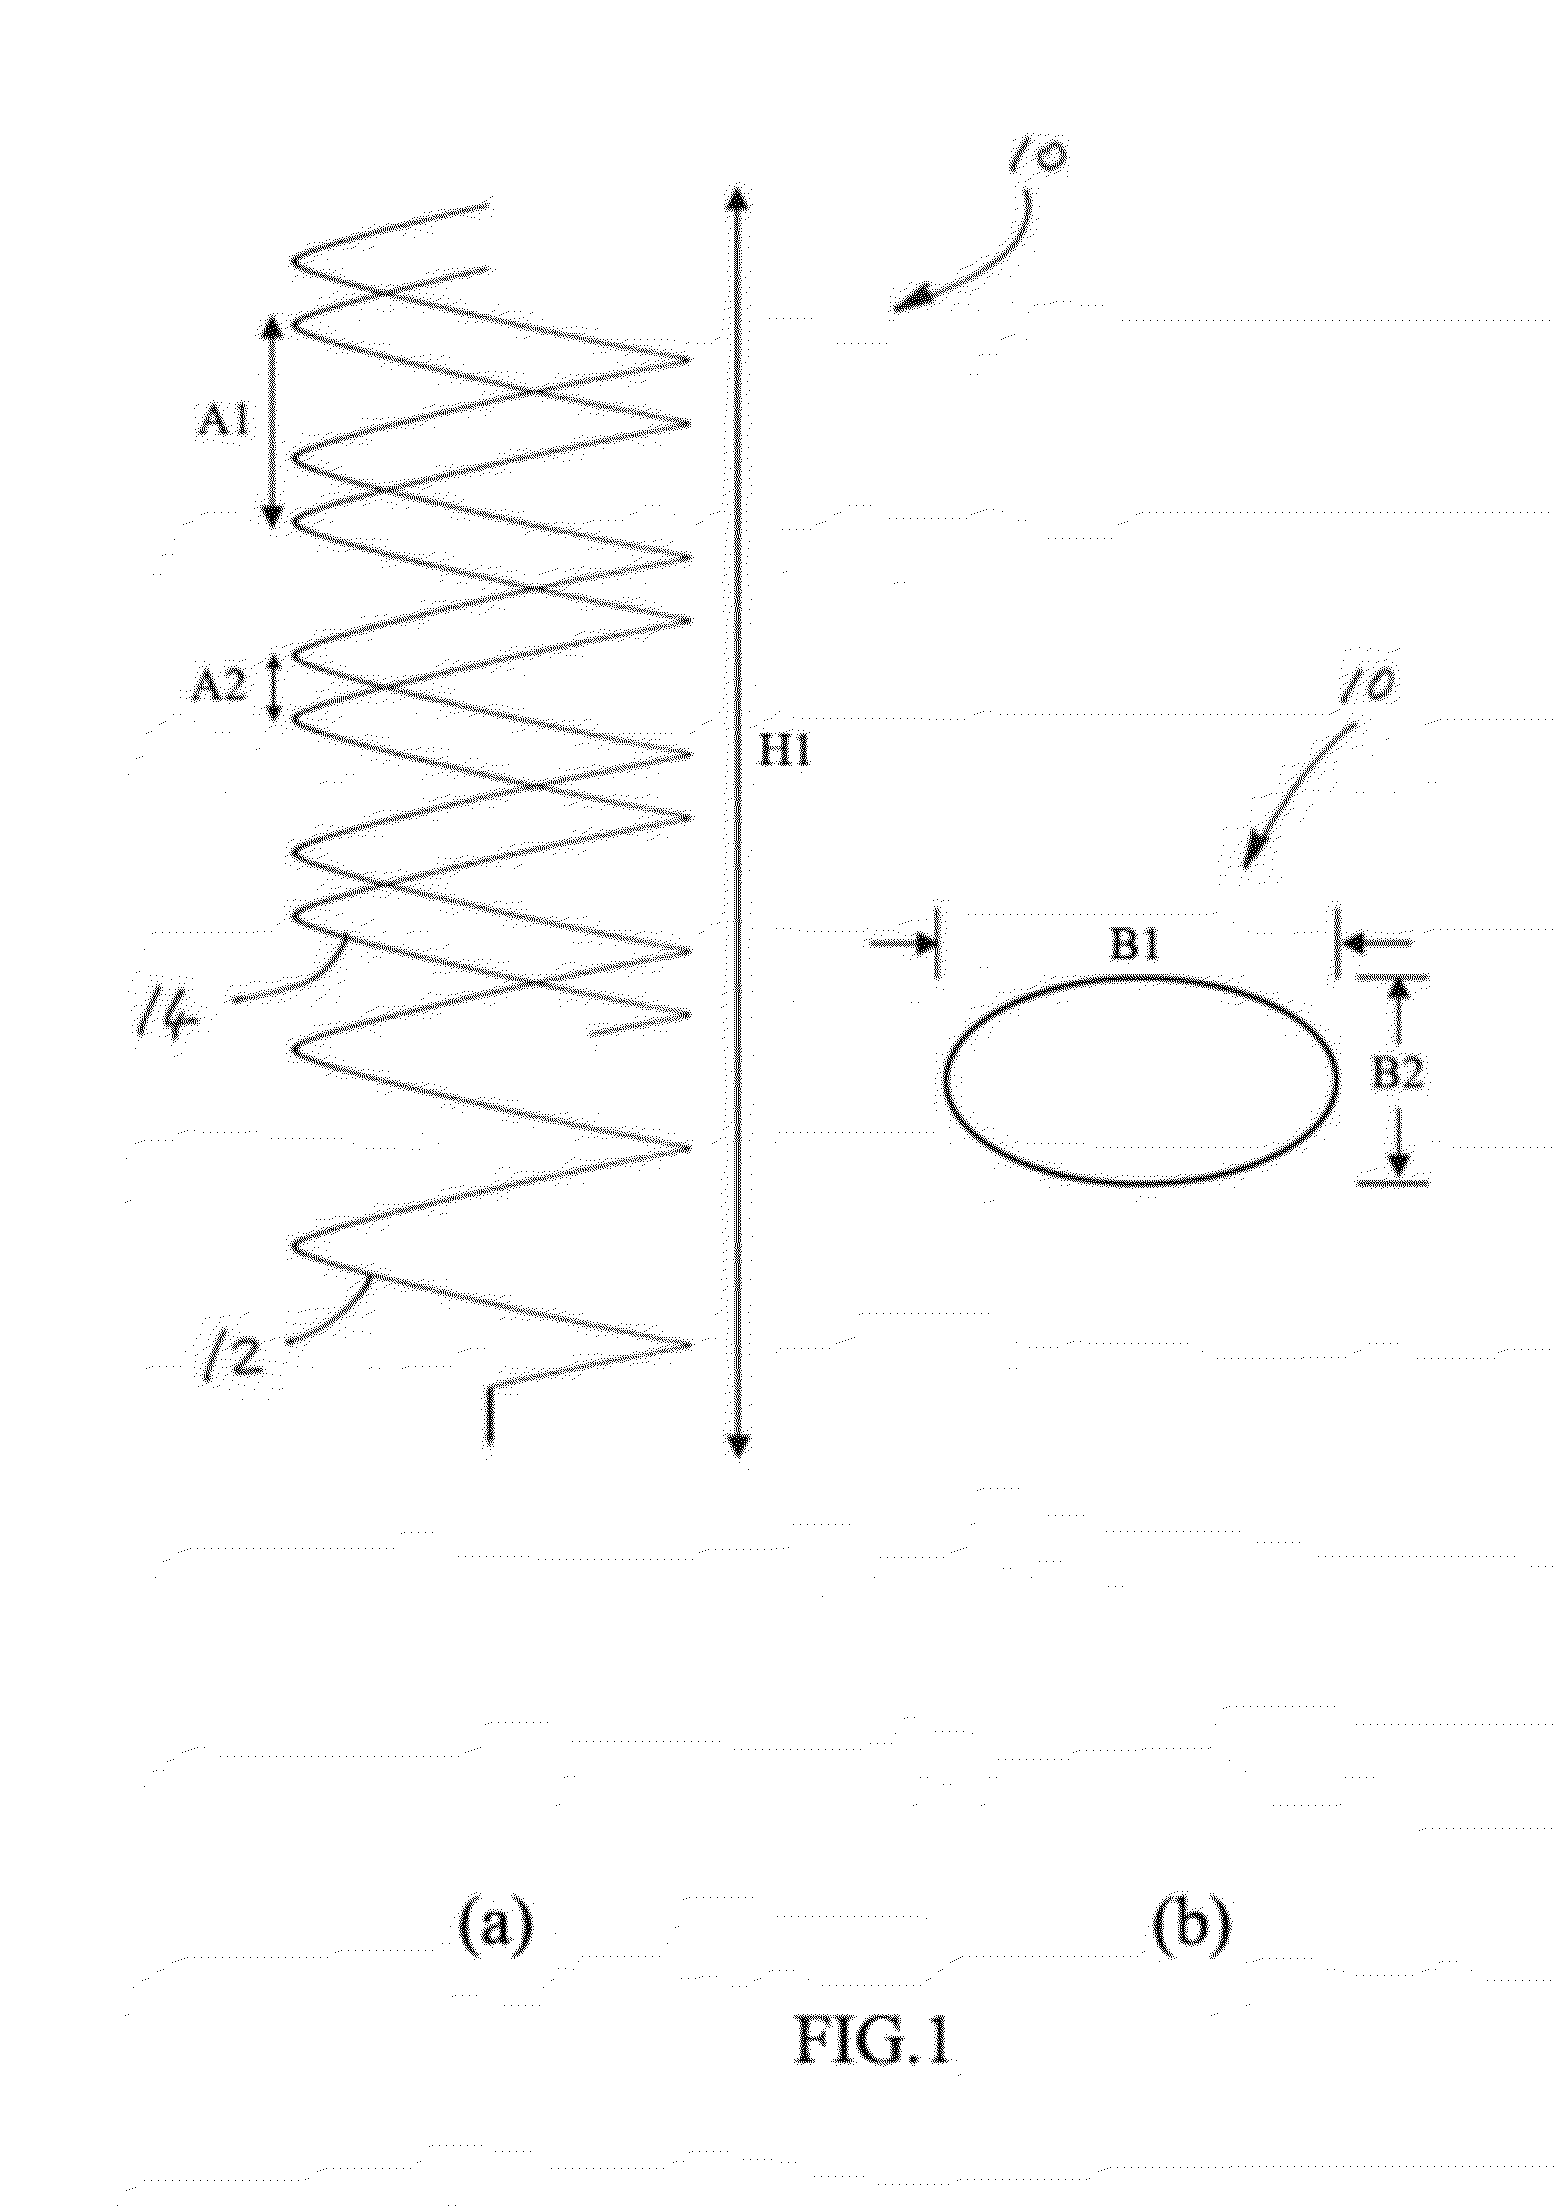 Dielectric loaded elliptical helix antenna